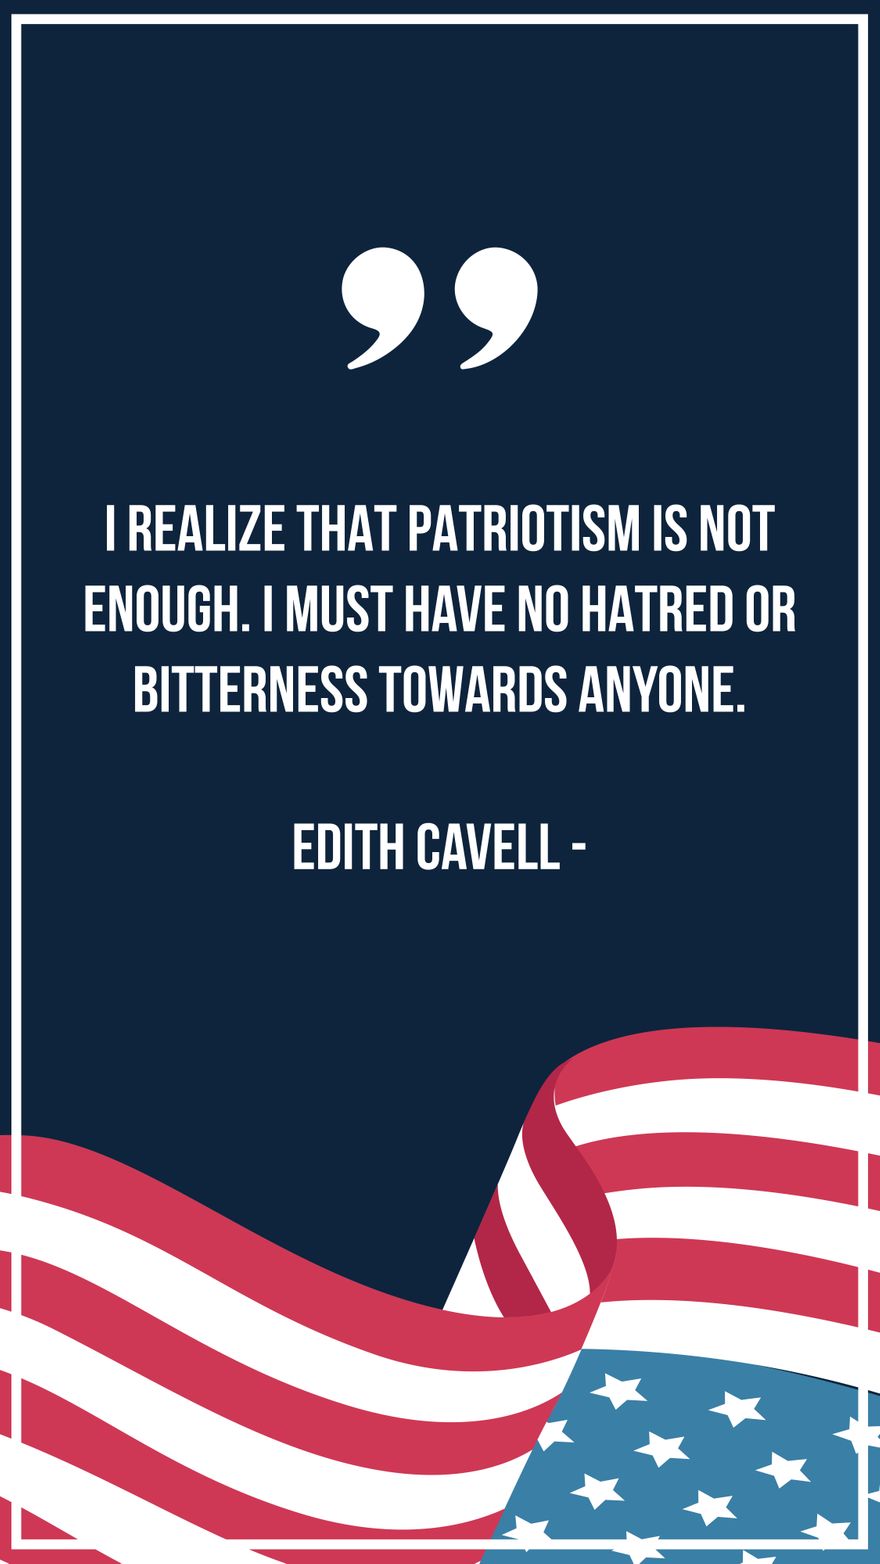 Edith Cavell - I realize that patriotism is not enough. I must have no hatred or bitterness towards anyone. in JPG